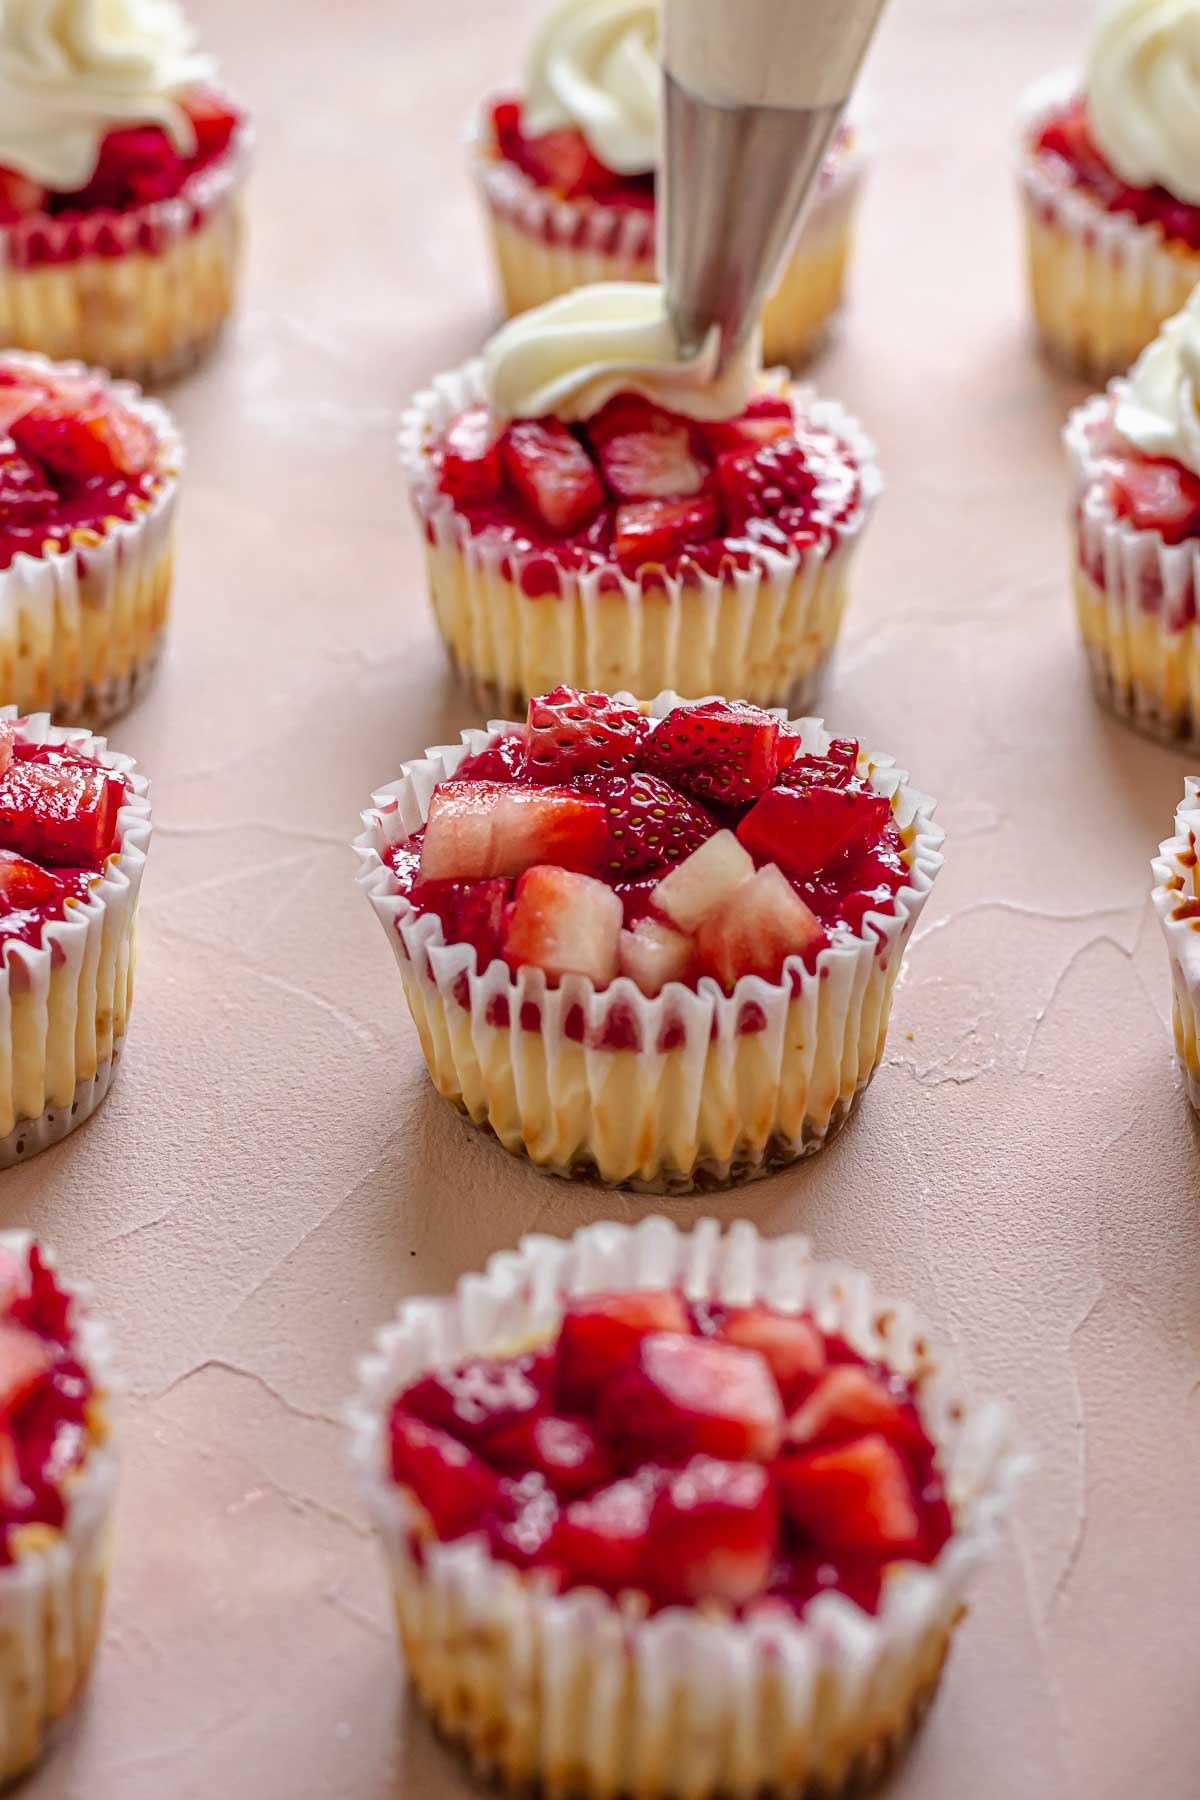 Whipped cream is piped onto the mini strawberry cheesecakes.